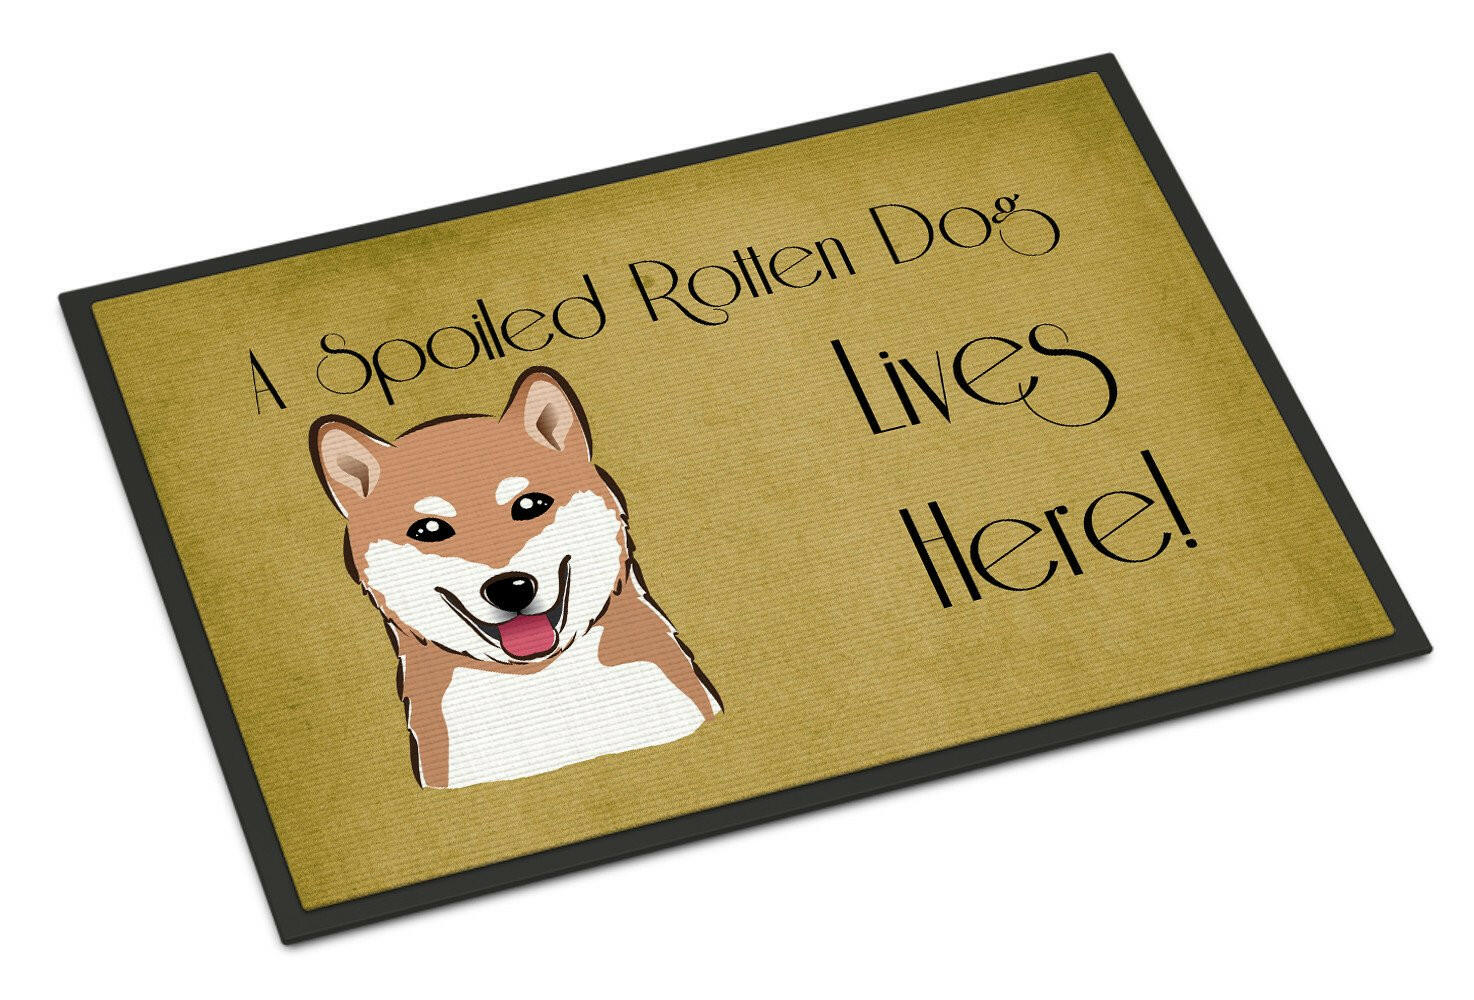 Shiba Inu Spoiled Dog Lives Here Indoor or Outdoor Mat 24x36 BB1473JMAT - the-store.com